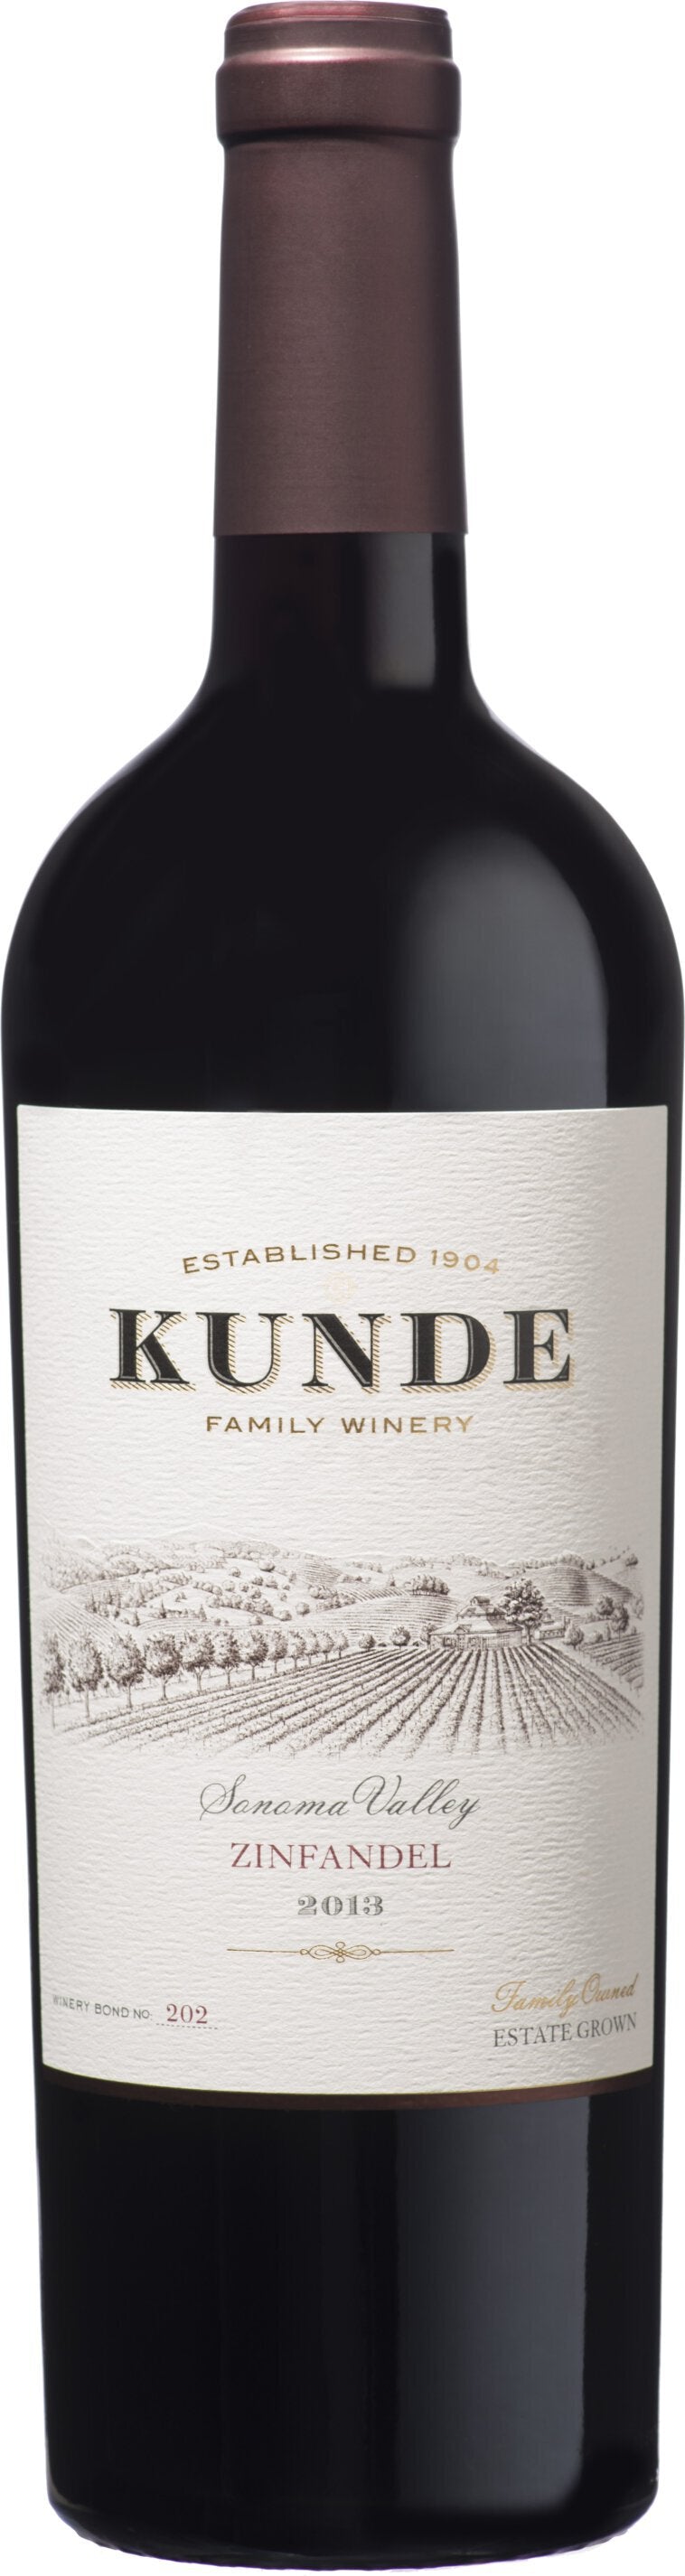 Kunde Family Winery Zinfandel Estate Grown Sonoma Valley